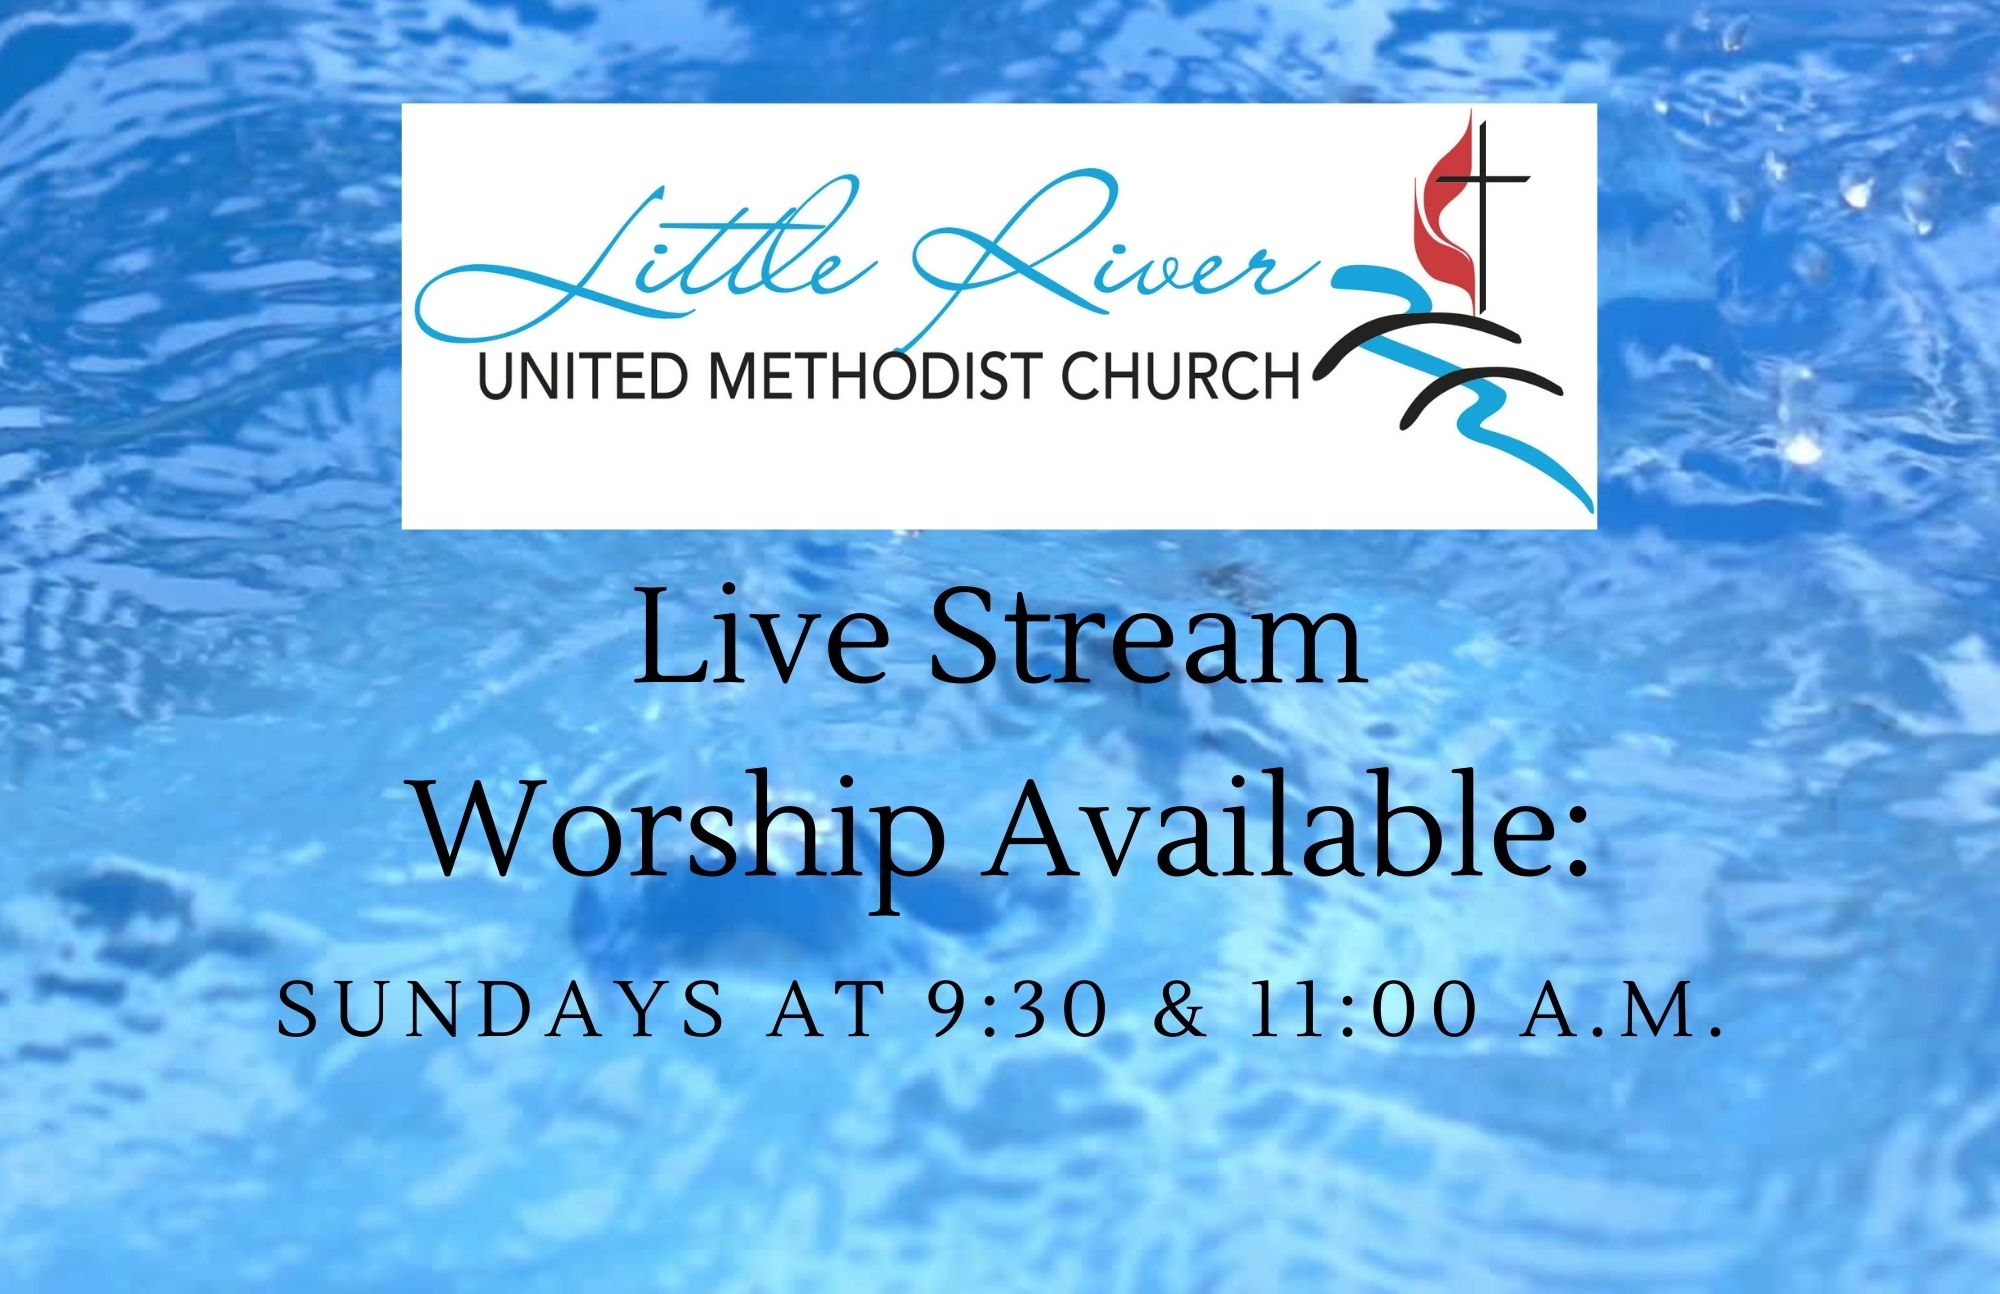 Live Stream Worship Available at 9:30 a.m. and 11:00 a.m. on Sundays